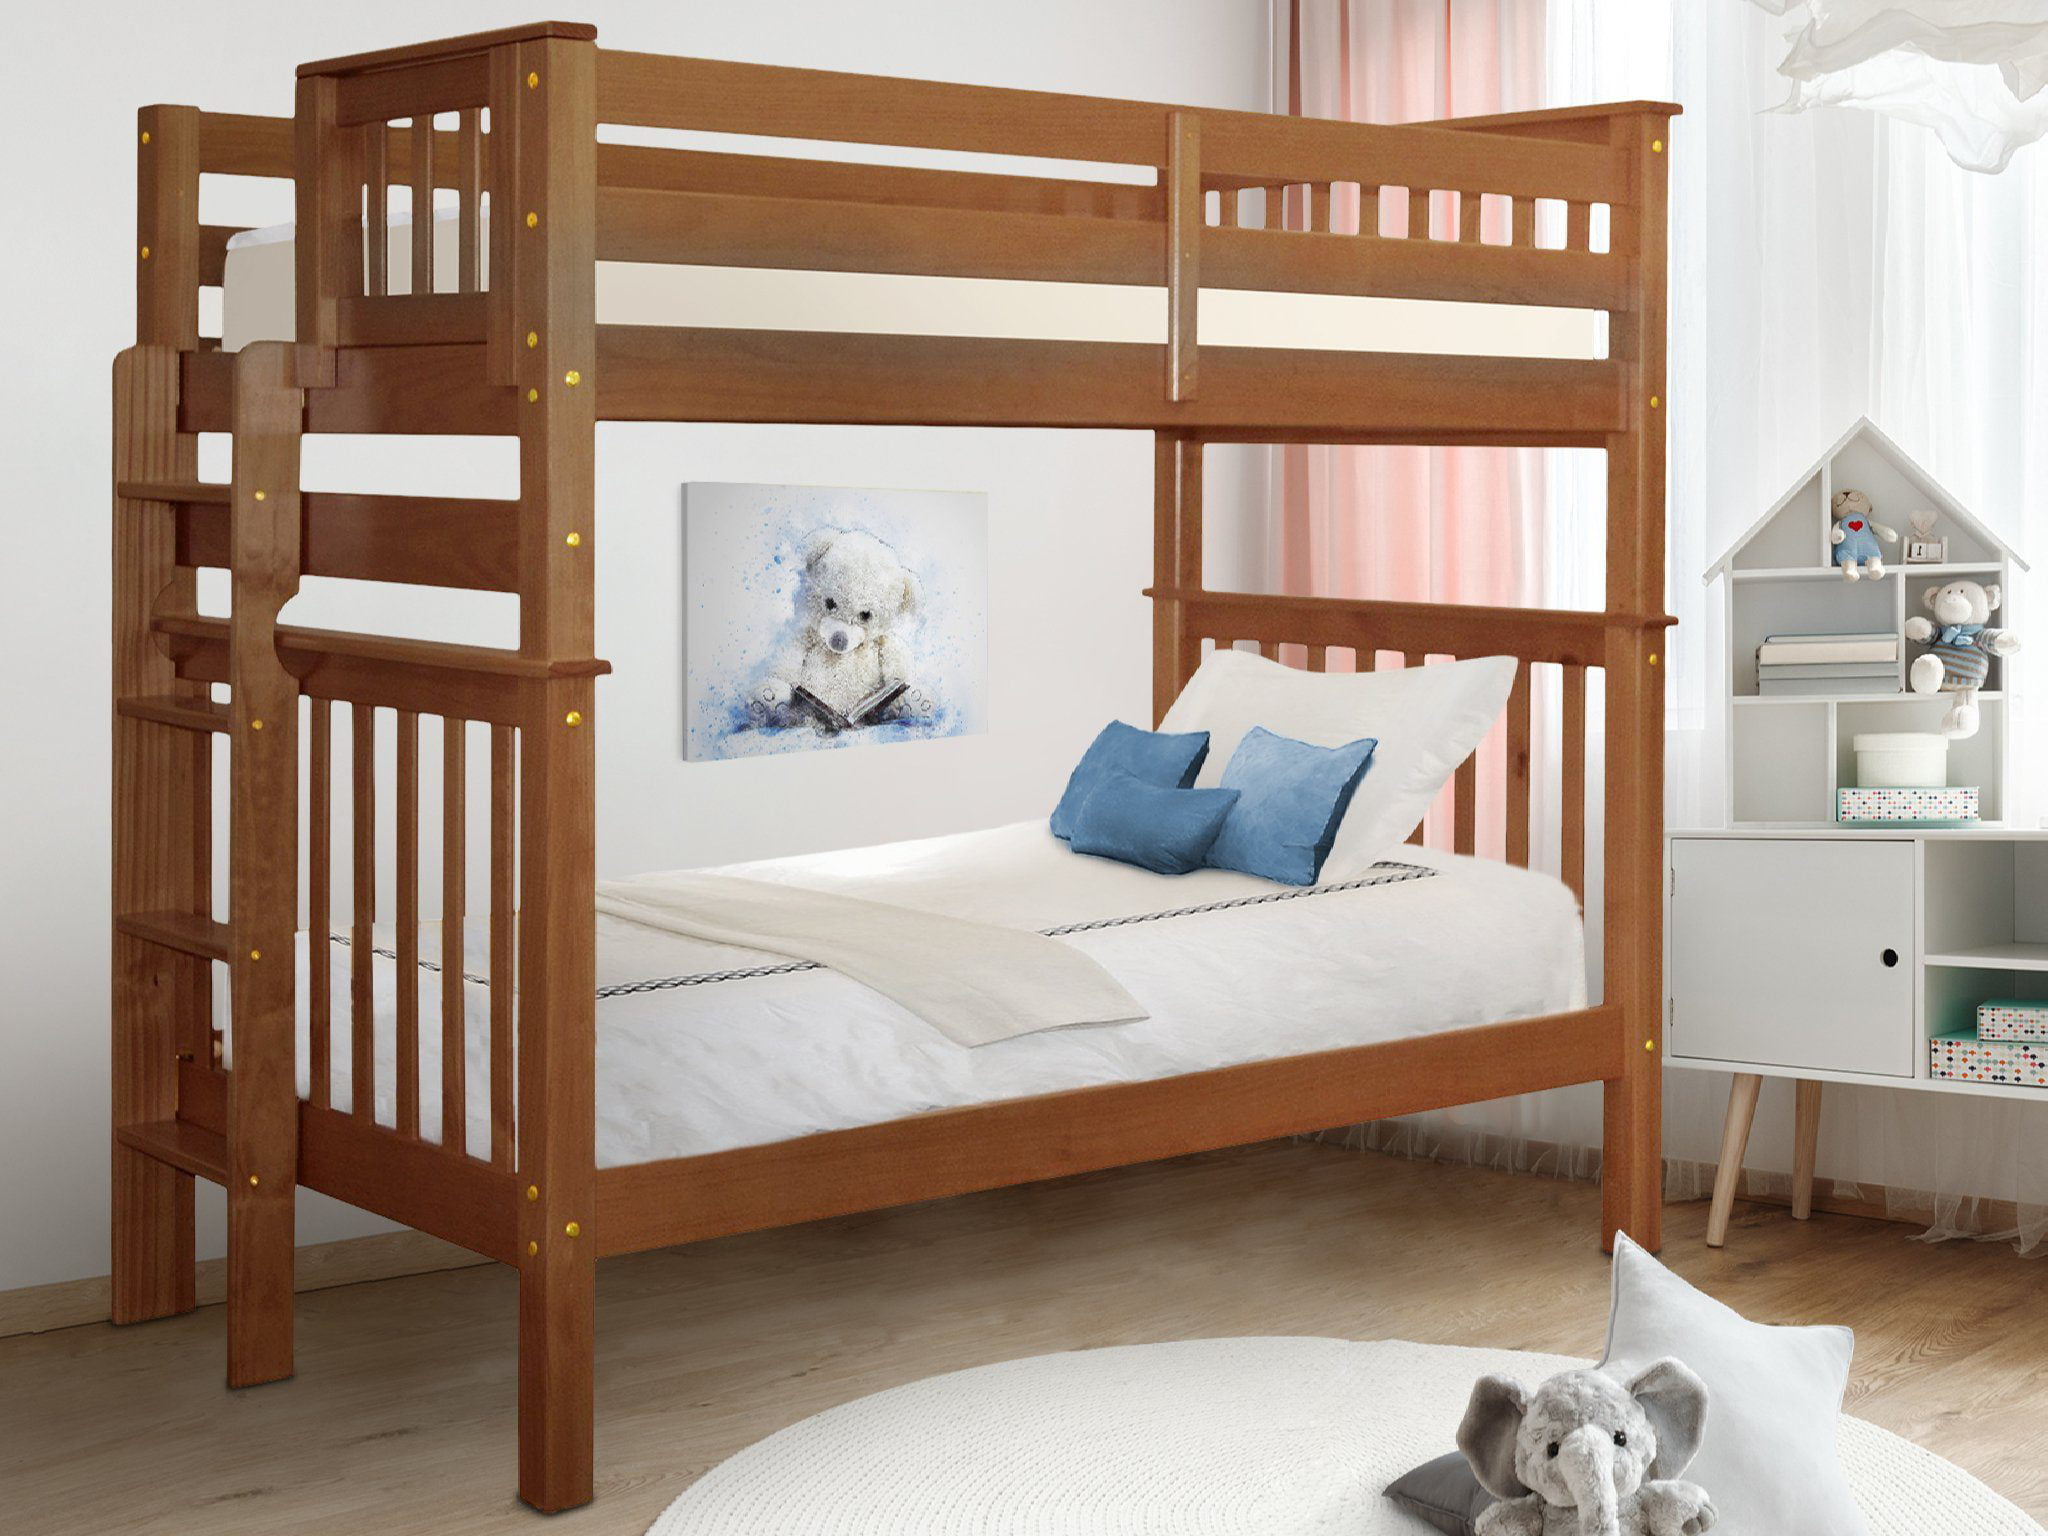 Bedz King Tall Bunk Beds Twin Over, Full Size Single Bunk Beds